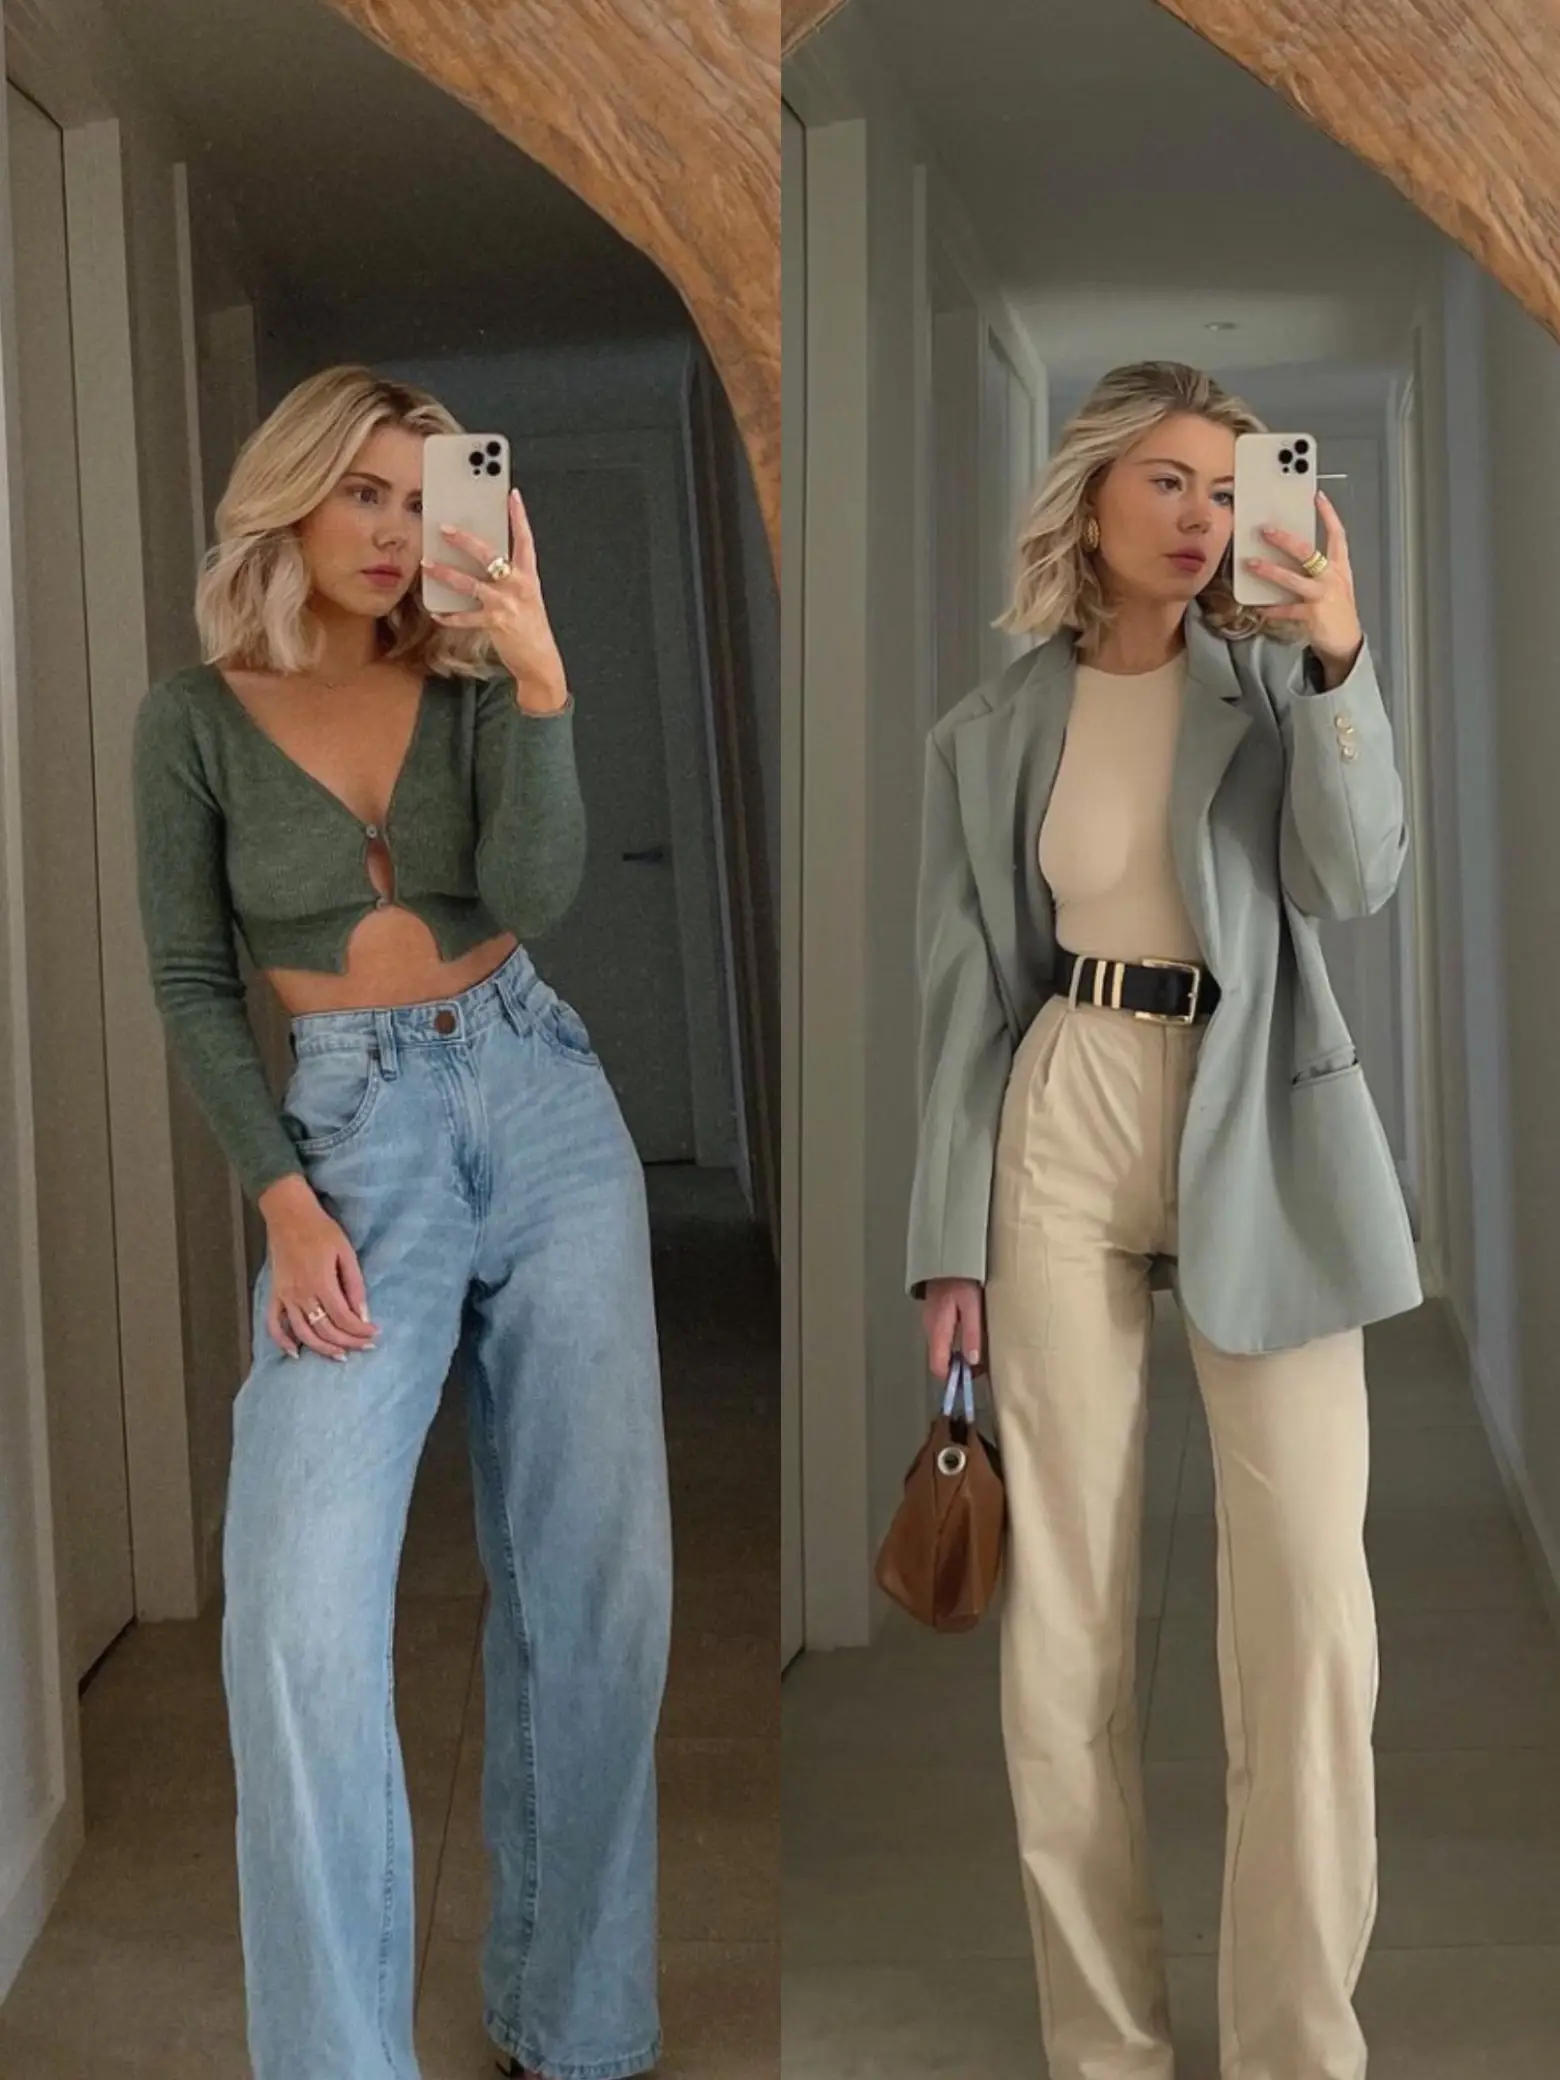  Two women are standing in a hallway. One woman is wearing a green shirt and jeans, while the other woman is wearing a tan jacket and white pants. They are both taking pictures of themselves in the mirror.